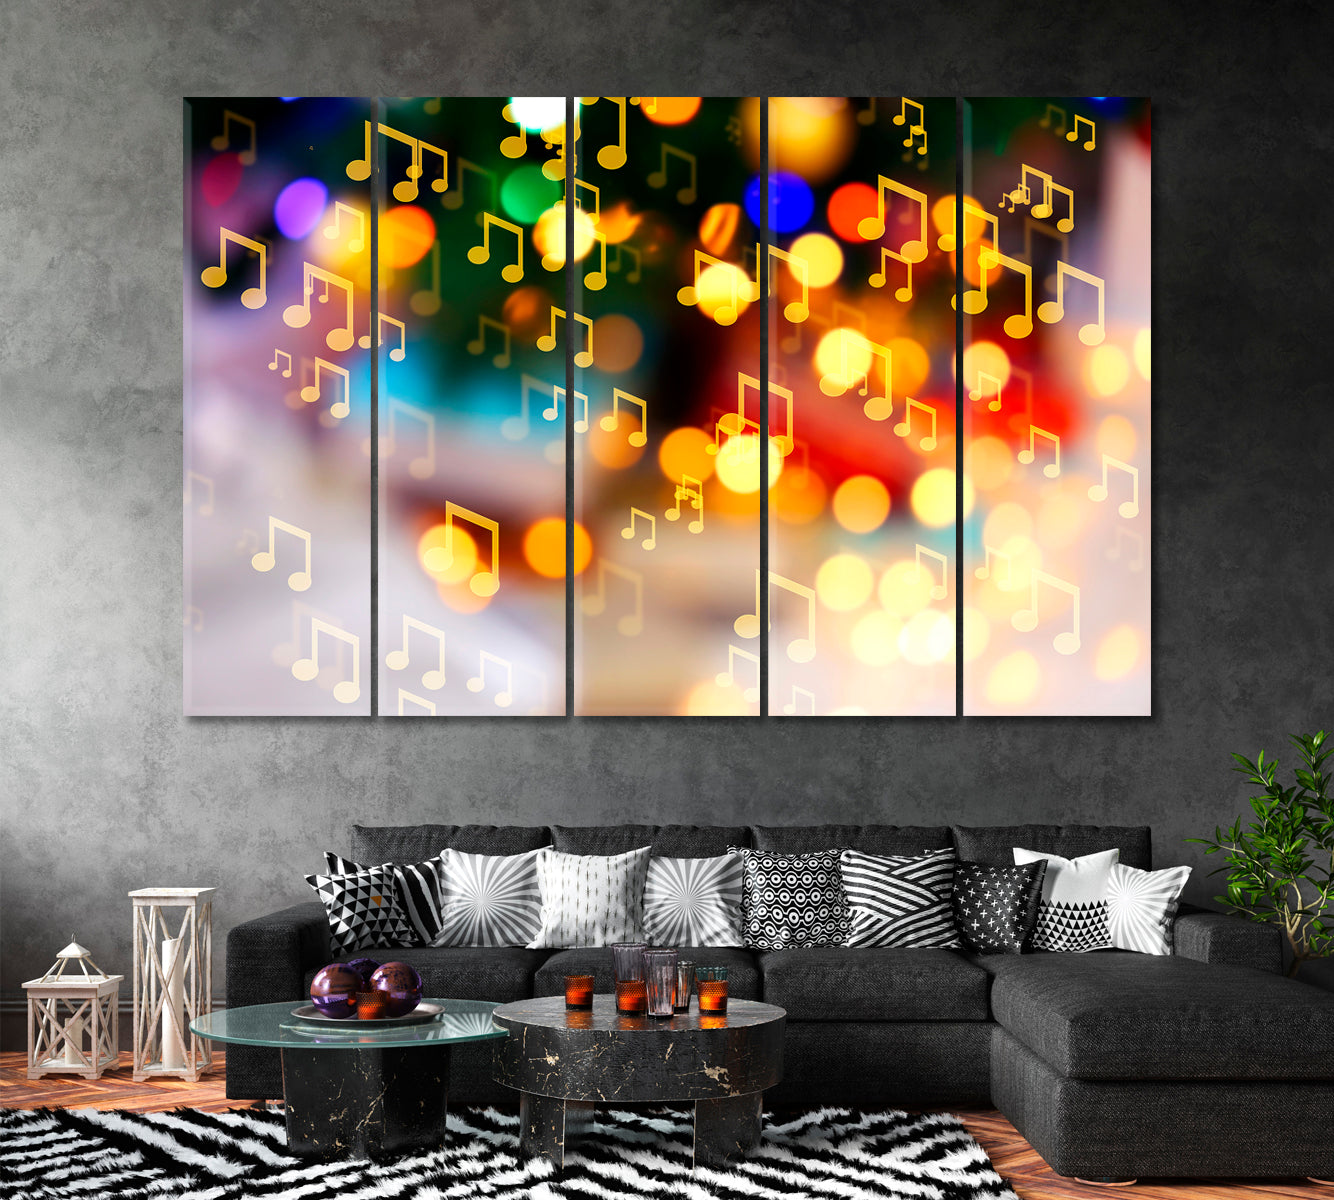 Music Notes on Blurred Lights Canvas Print ArtLexy 5 Panels 36"x24" inches 